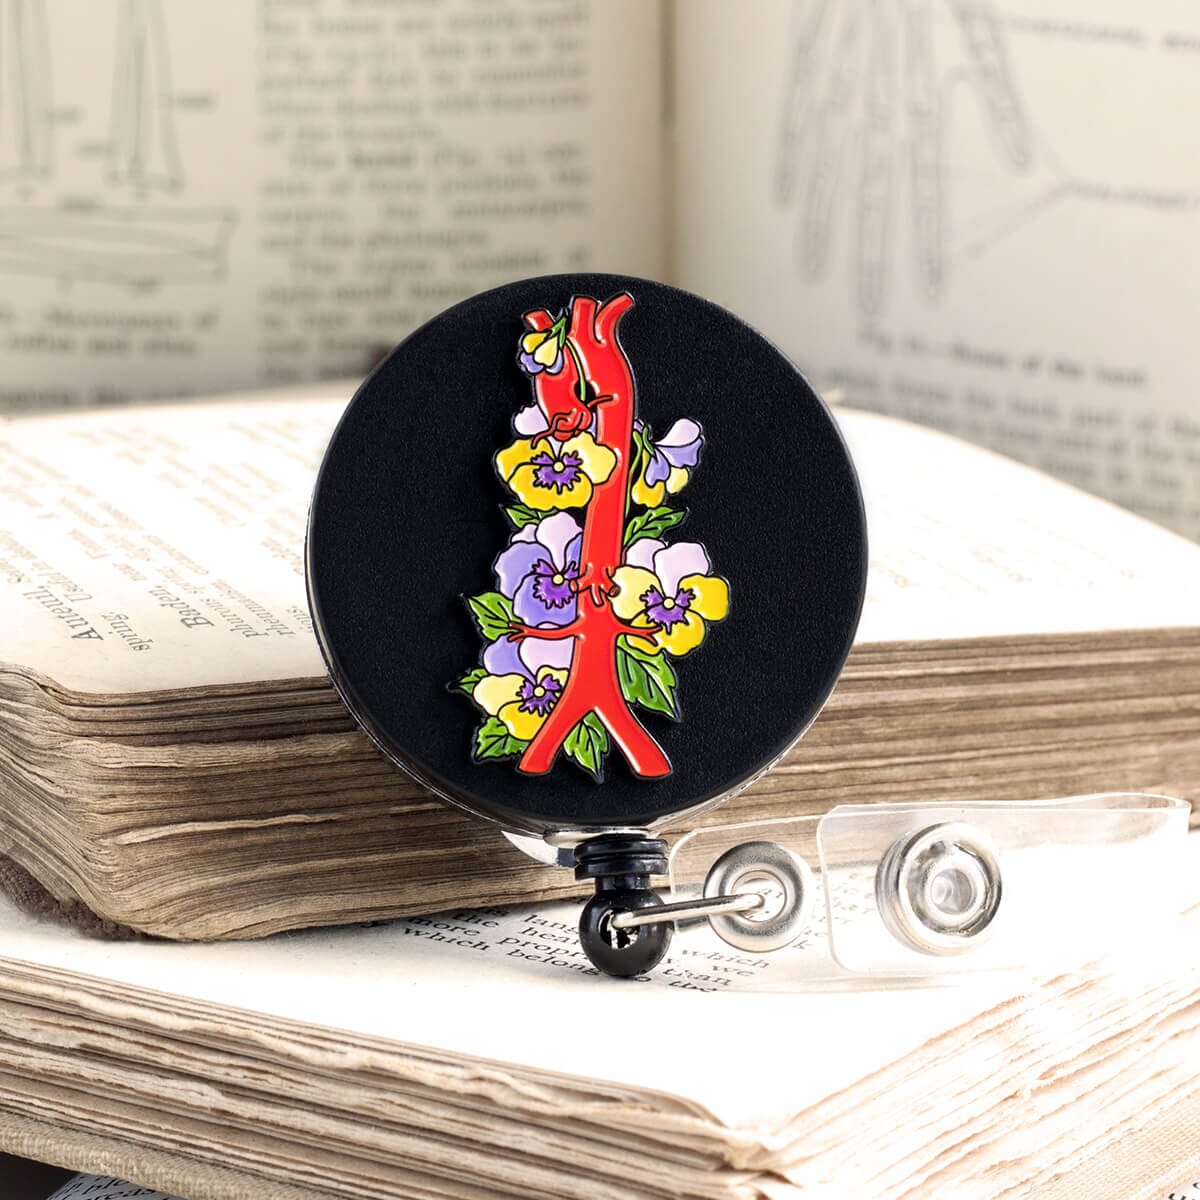 Aorta with flowers badge reel - Medical Gift - Codex Anatomicus